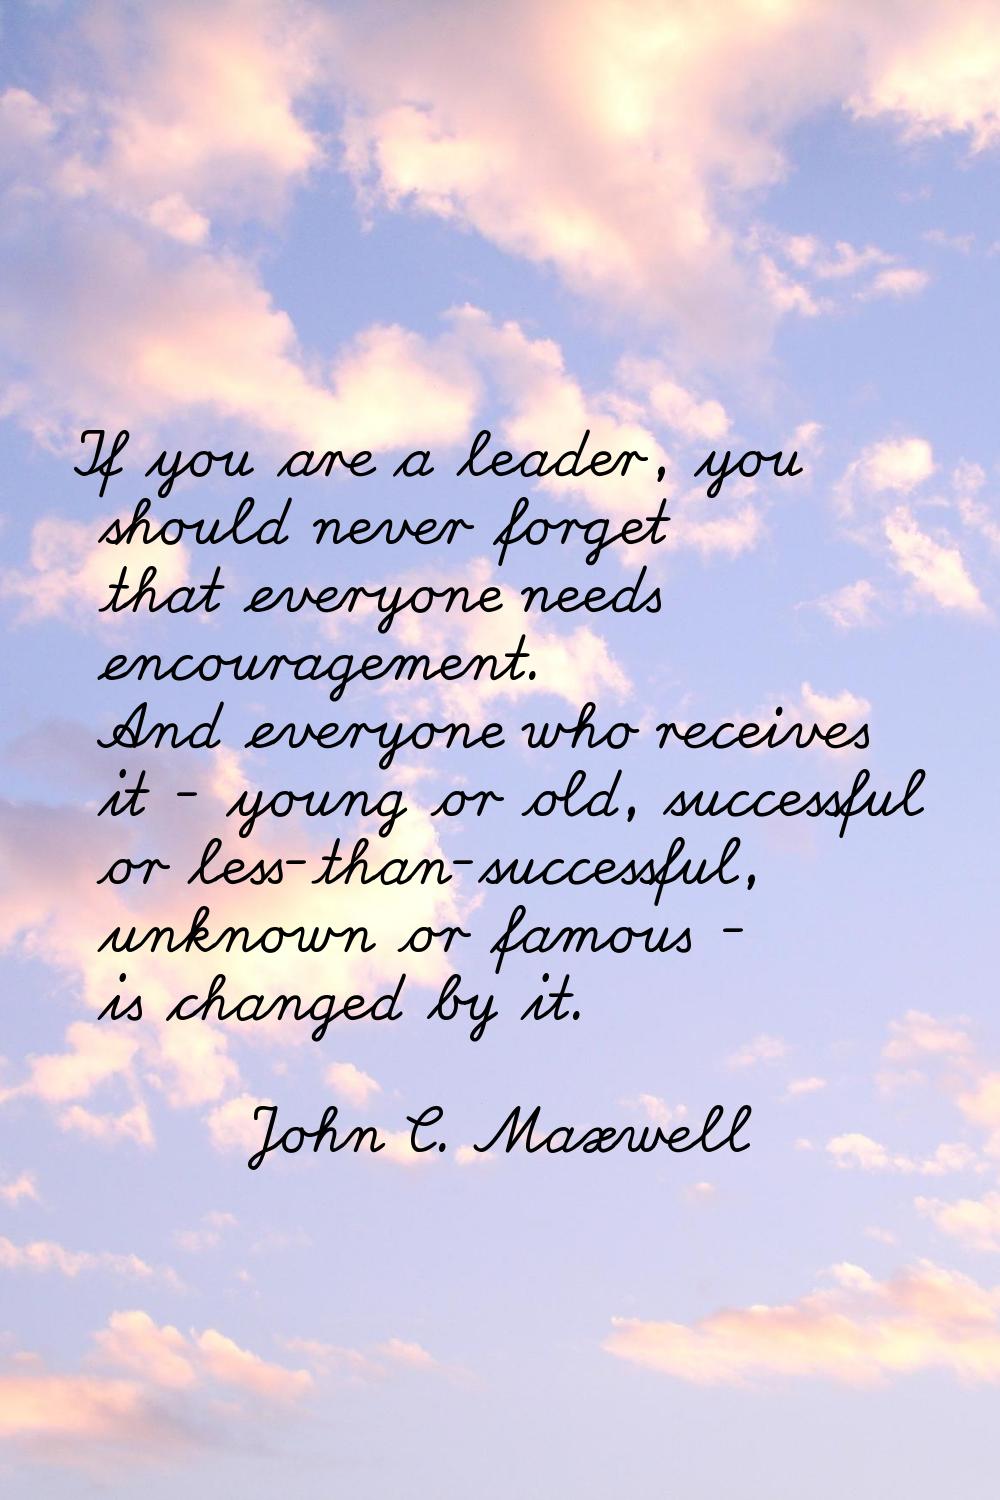 If you are a leader, you should never forget that everyone needs encouragement. And everyone who re